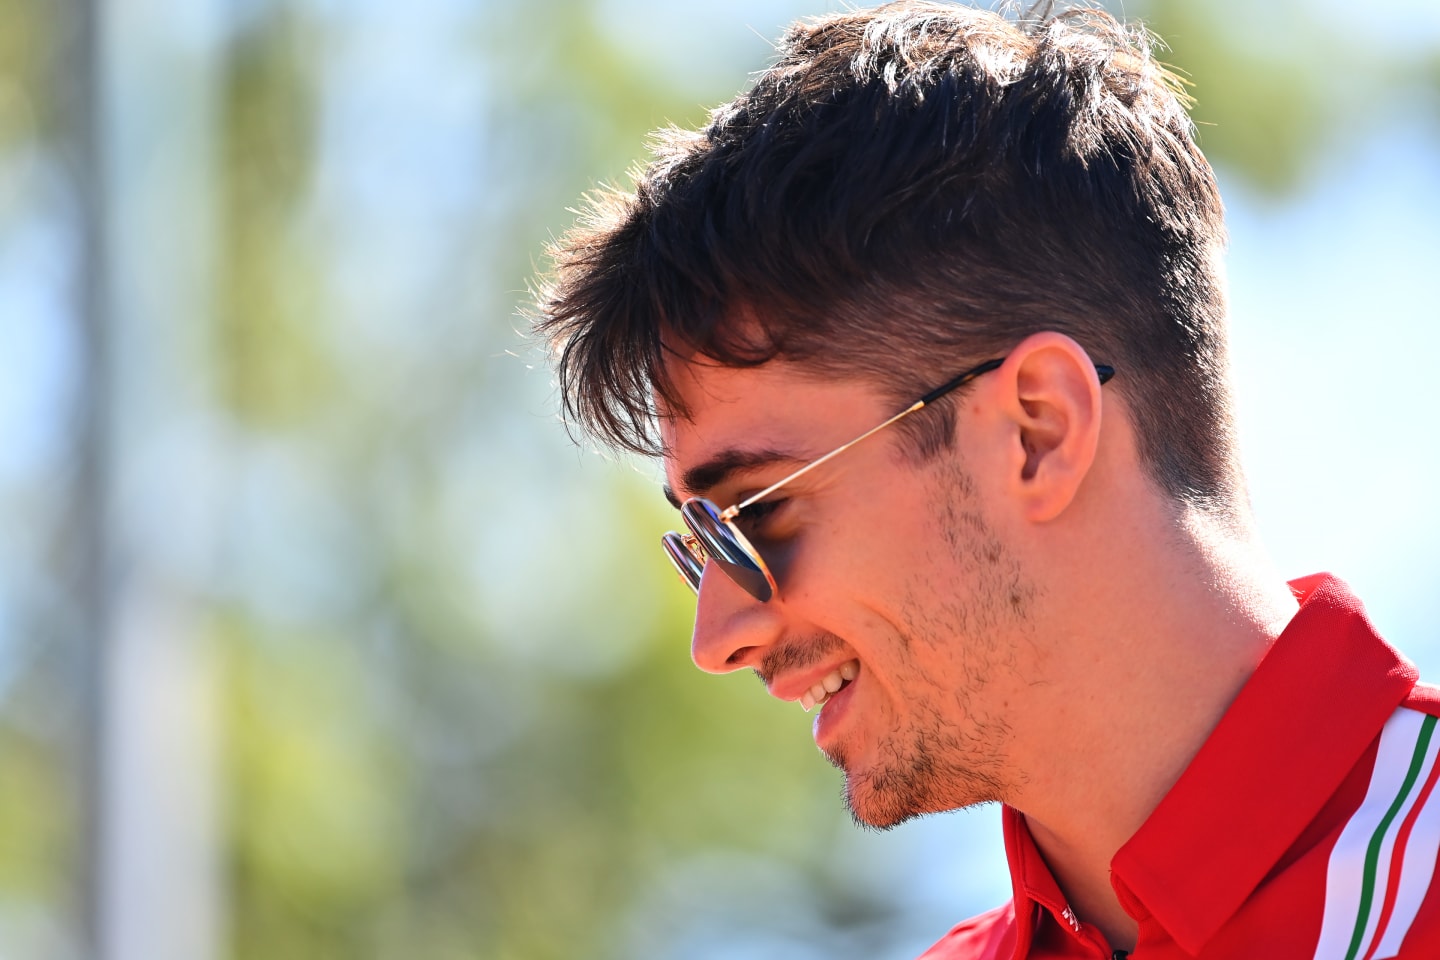 MELBOURNE, AUSTRALIA - MARCH 12: Charles Leclerc of Monaco and Ferrari walks in the Paddock during